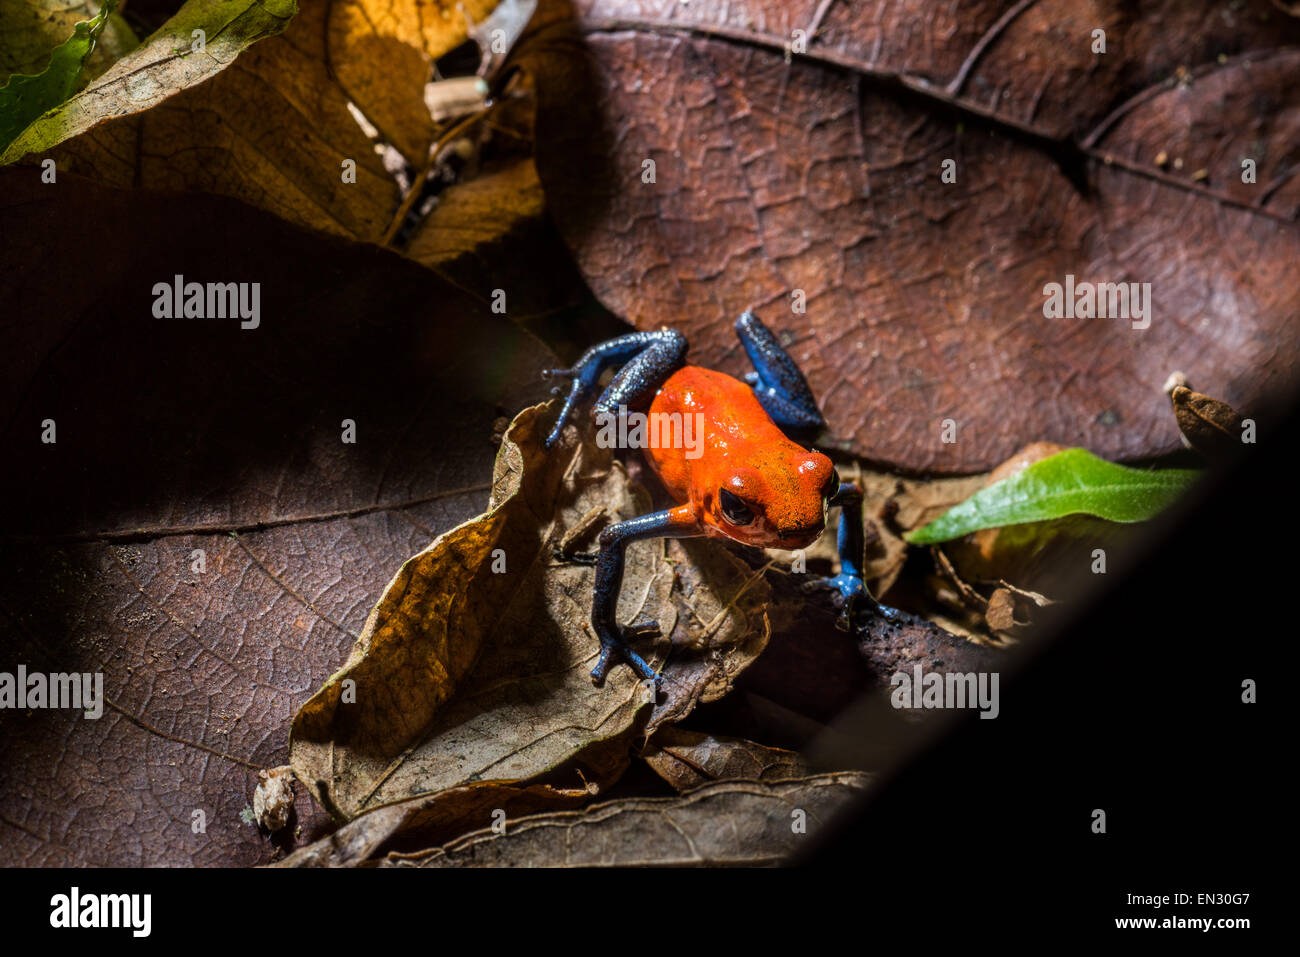 Strawberry poison dart frog Wildlife COSTA RICA Dendrobates pumilio Red-et-blue Poison Frog, grenouille toxique rouge tree climber cl Banque D'Images